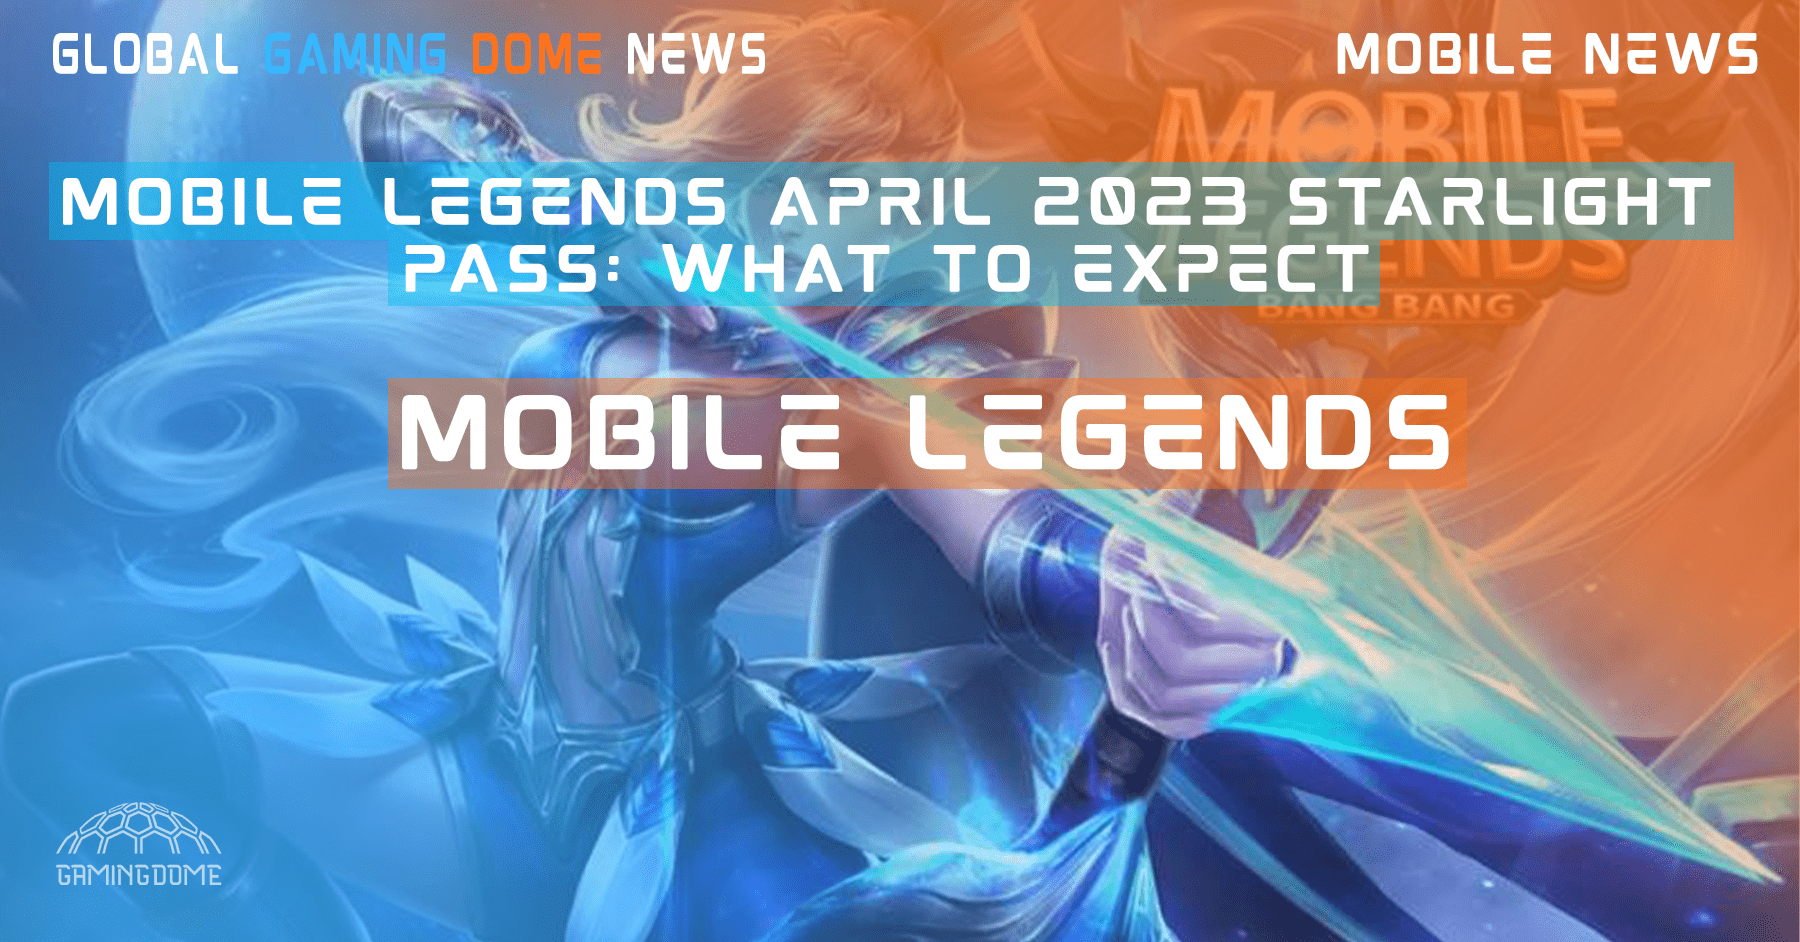 MOBILE LEGENDS APRIL 2023 STARLIGHT PASS: WHAT TO EXPECT